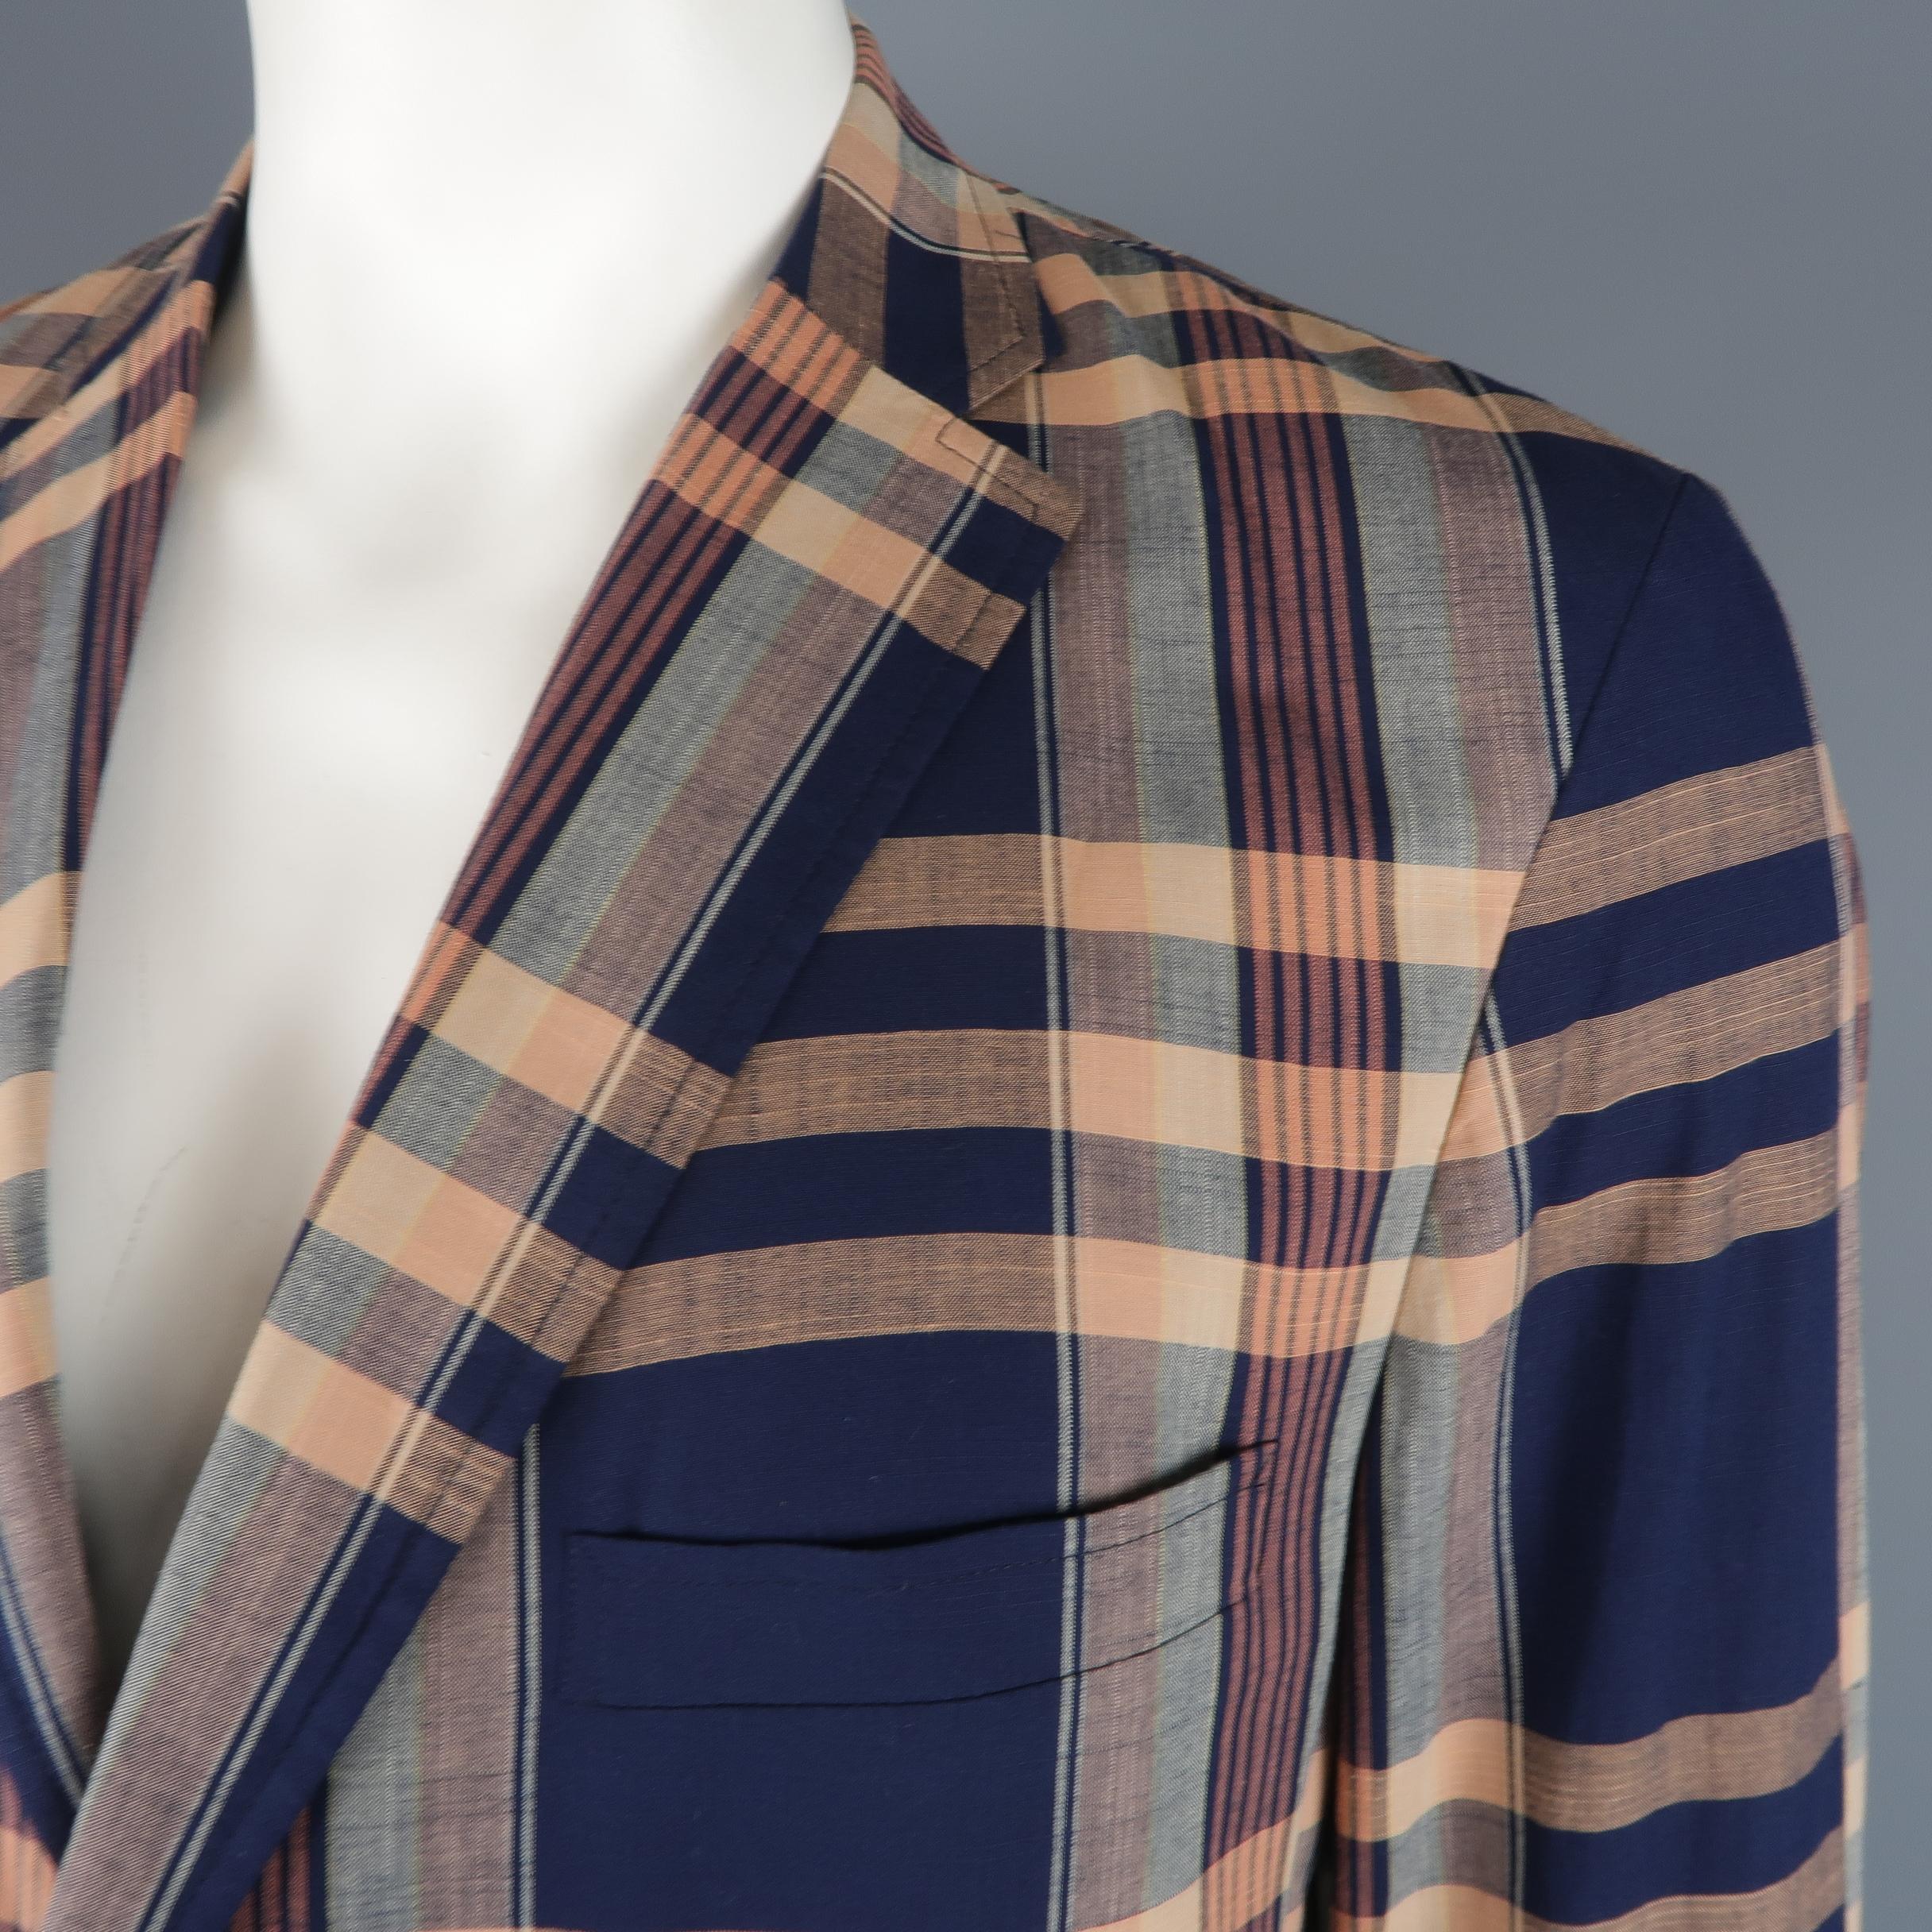 Single breasted GITMAN BROS X UNIONMADE casual sport coat comes in Navy and peach plaid pattern cotton a notch lapel, two button front, and patch flap pockets. Made in USA.

New with Tags.
Marked: 44
 
Measurements:
 
Shoulder: 19 in.
Chest: 48